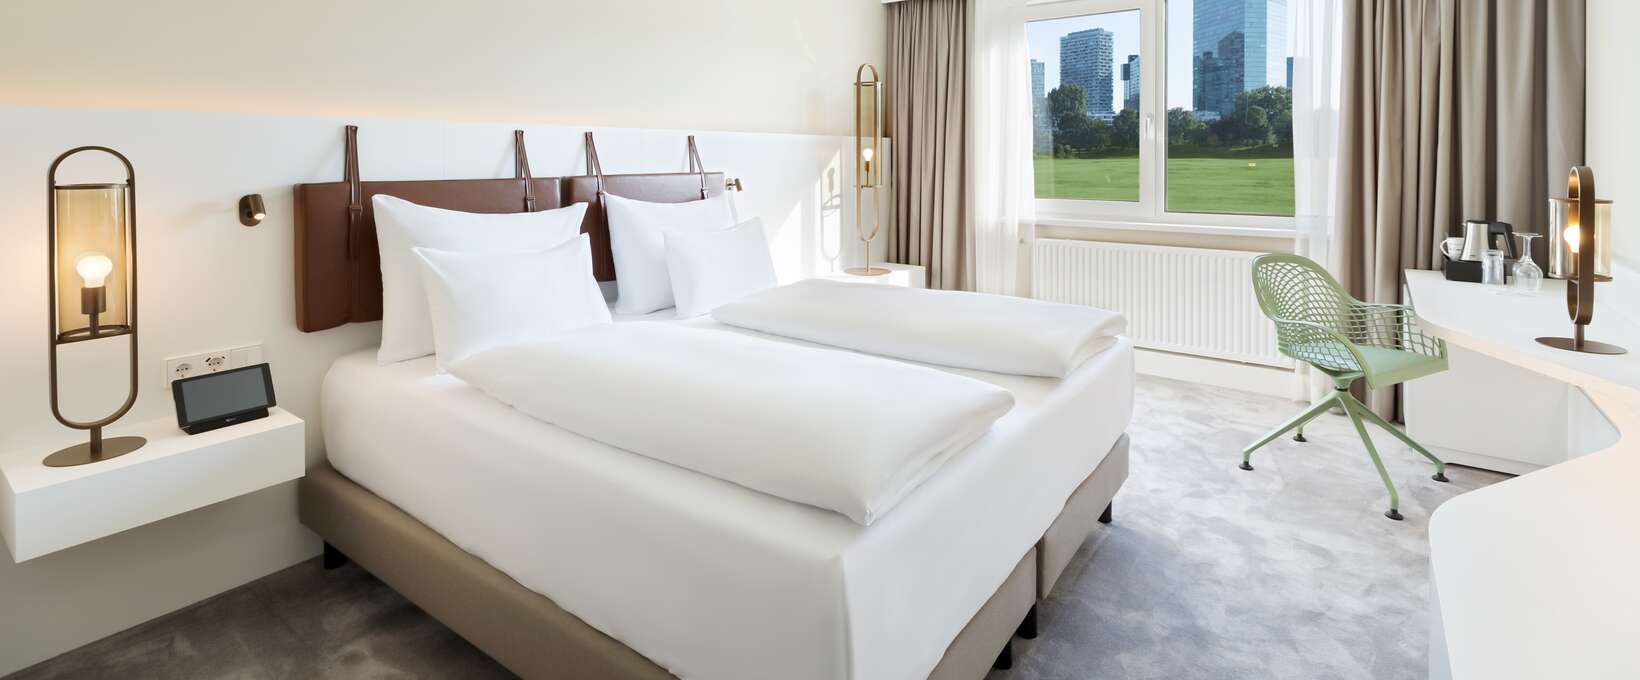 Superior Room with double bed | Hotel Bosei in Vienna